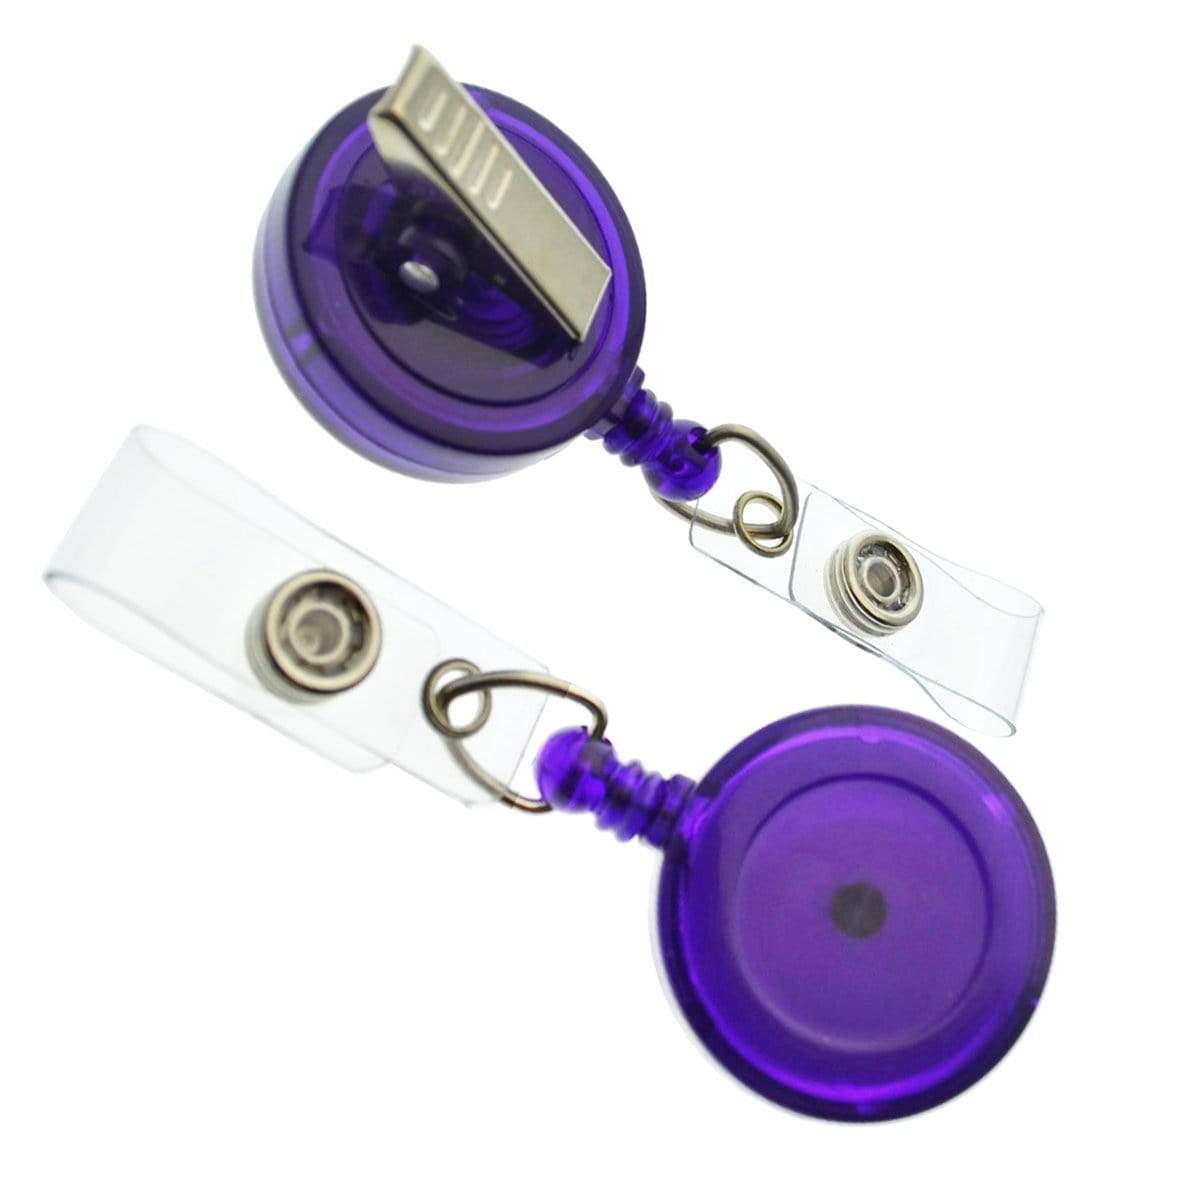 Translucent Badge Reel with Swivel Clip (p/n 2120-762X)